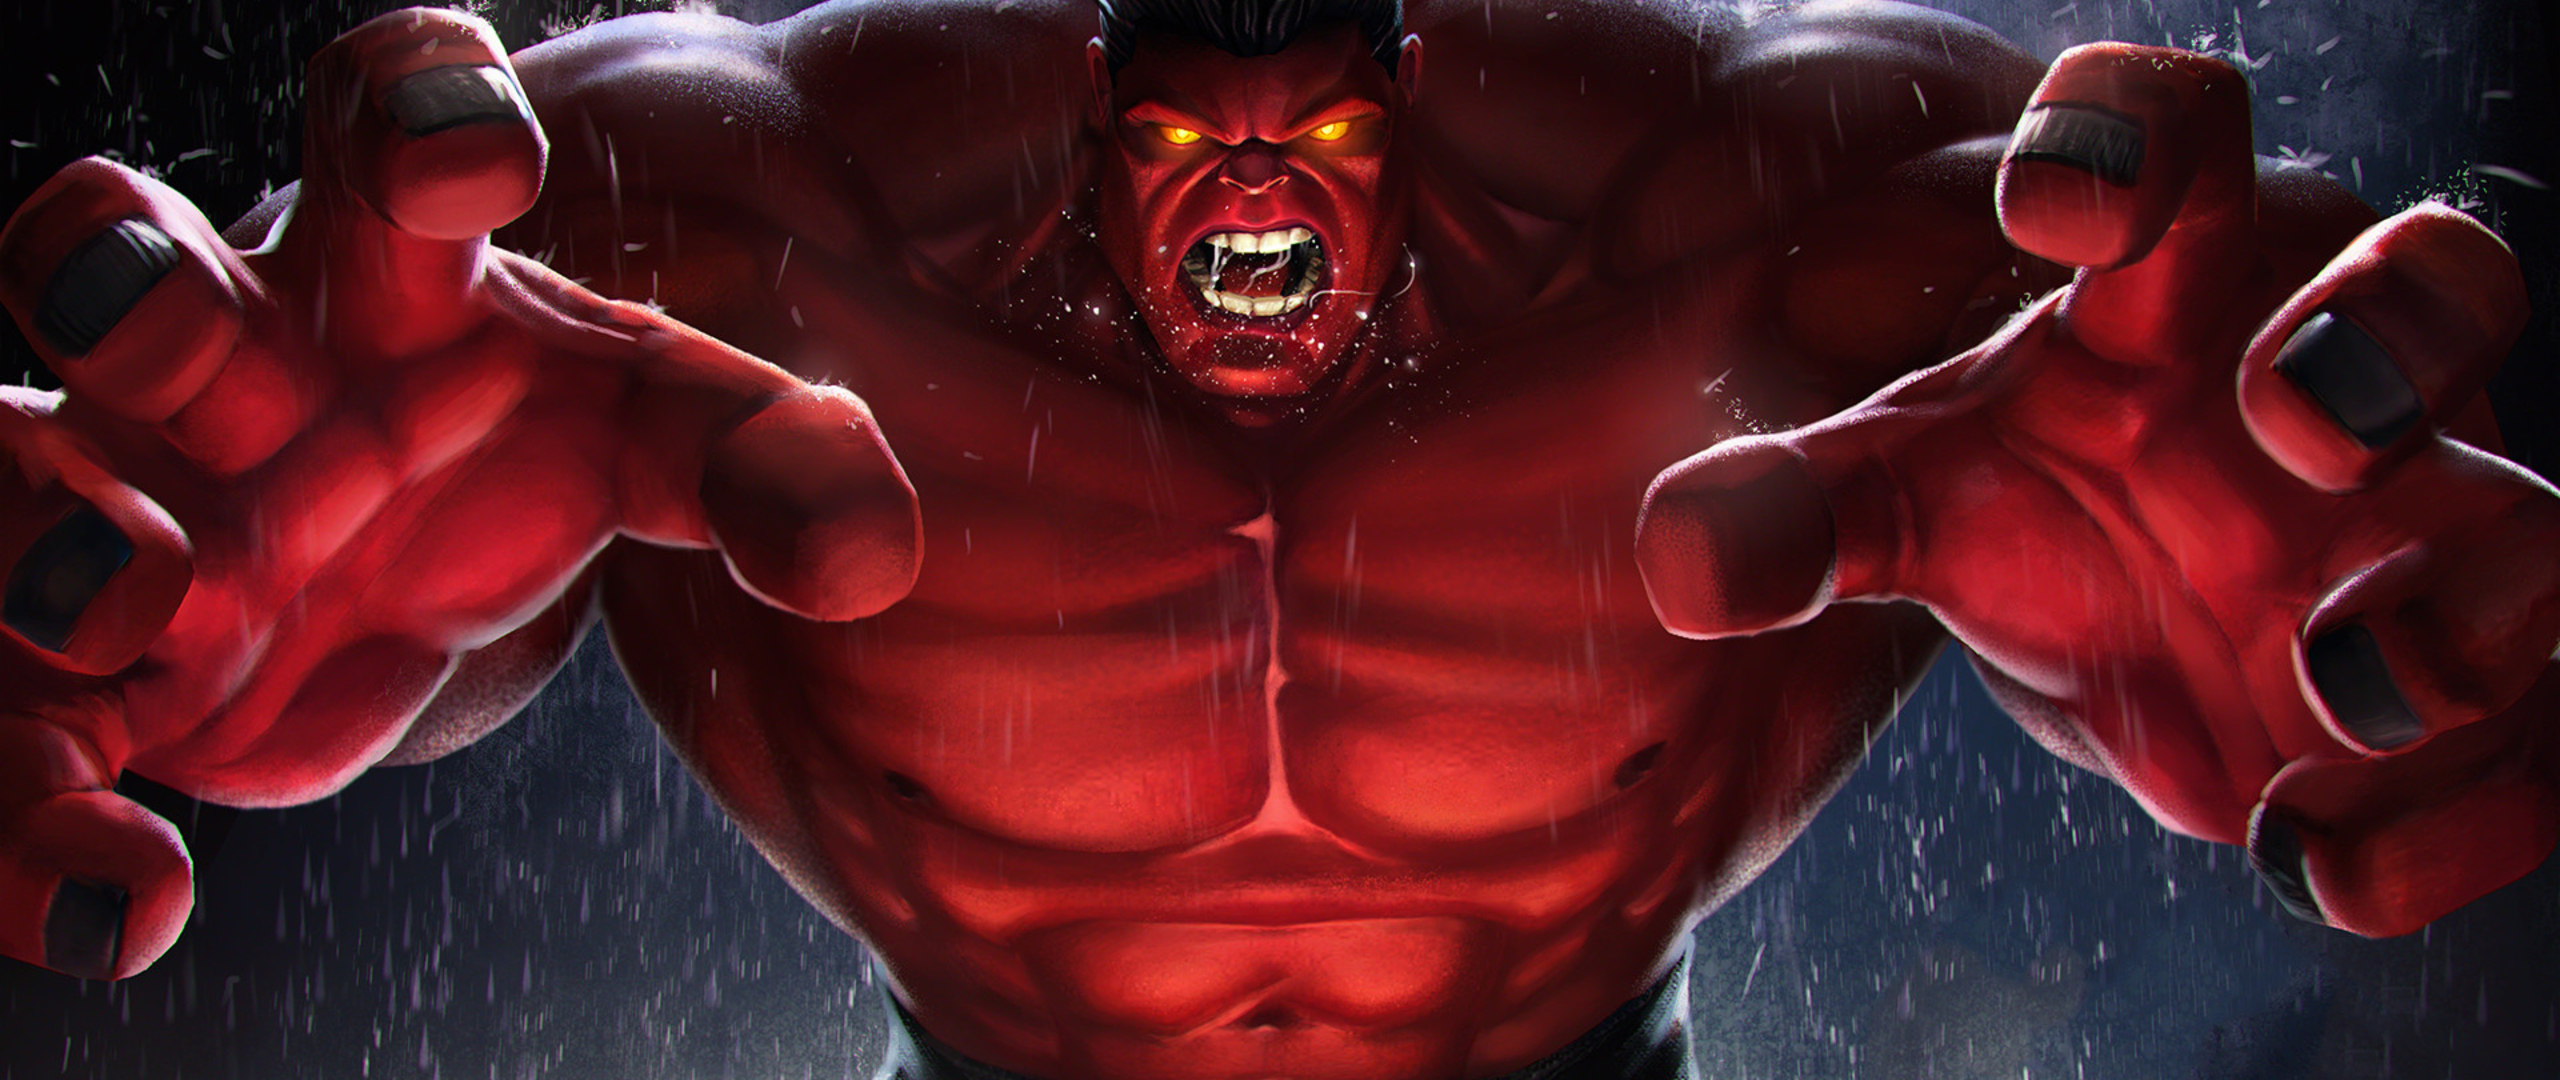 X red hulk contest of champions x resolution hd k wallpapers images backgrounds photos and pictures